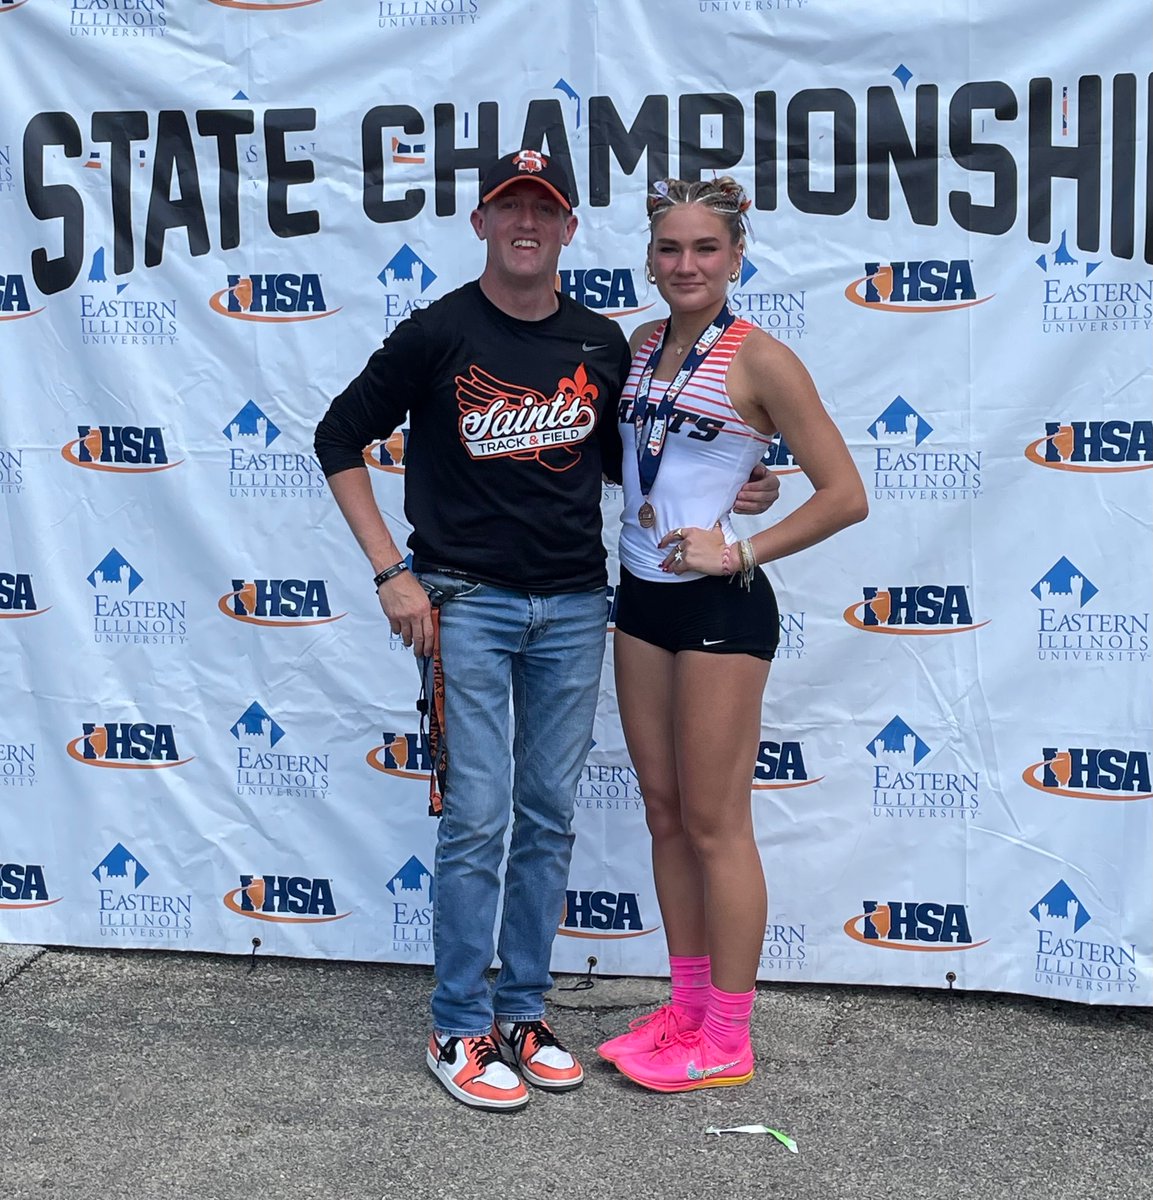 Thanks to @Marleyandelman for all the memories over these last 4 years. It was amazing to watch you race and go after everything you wanted. Being able to end your high school career with a PR and medal in your final race at the state meet is special! #storybookending